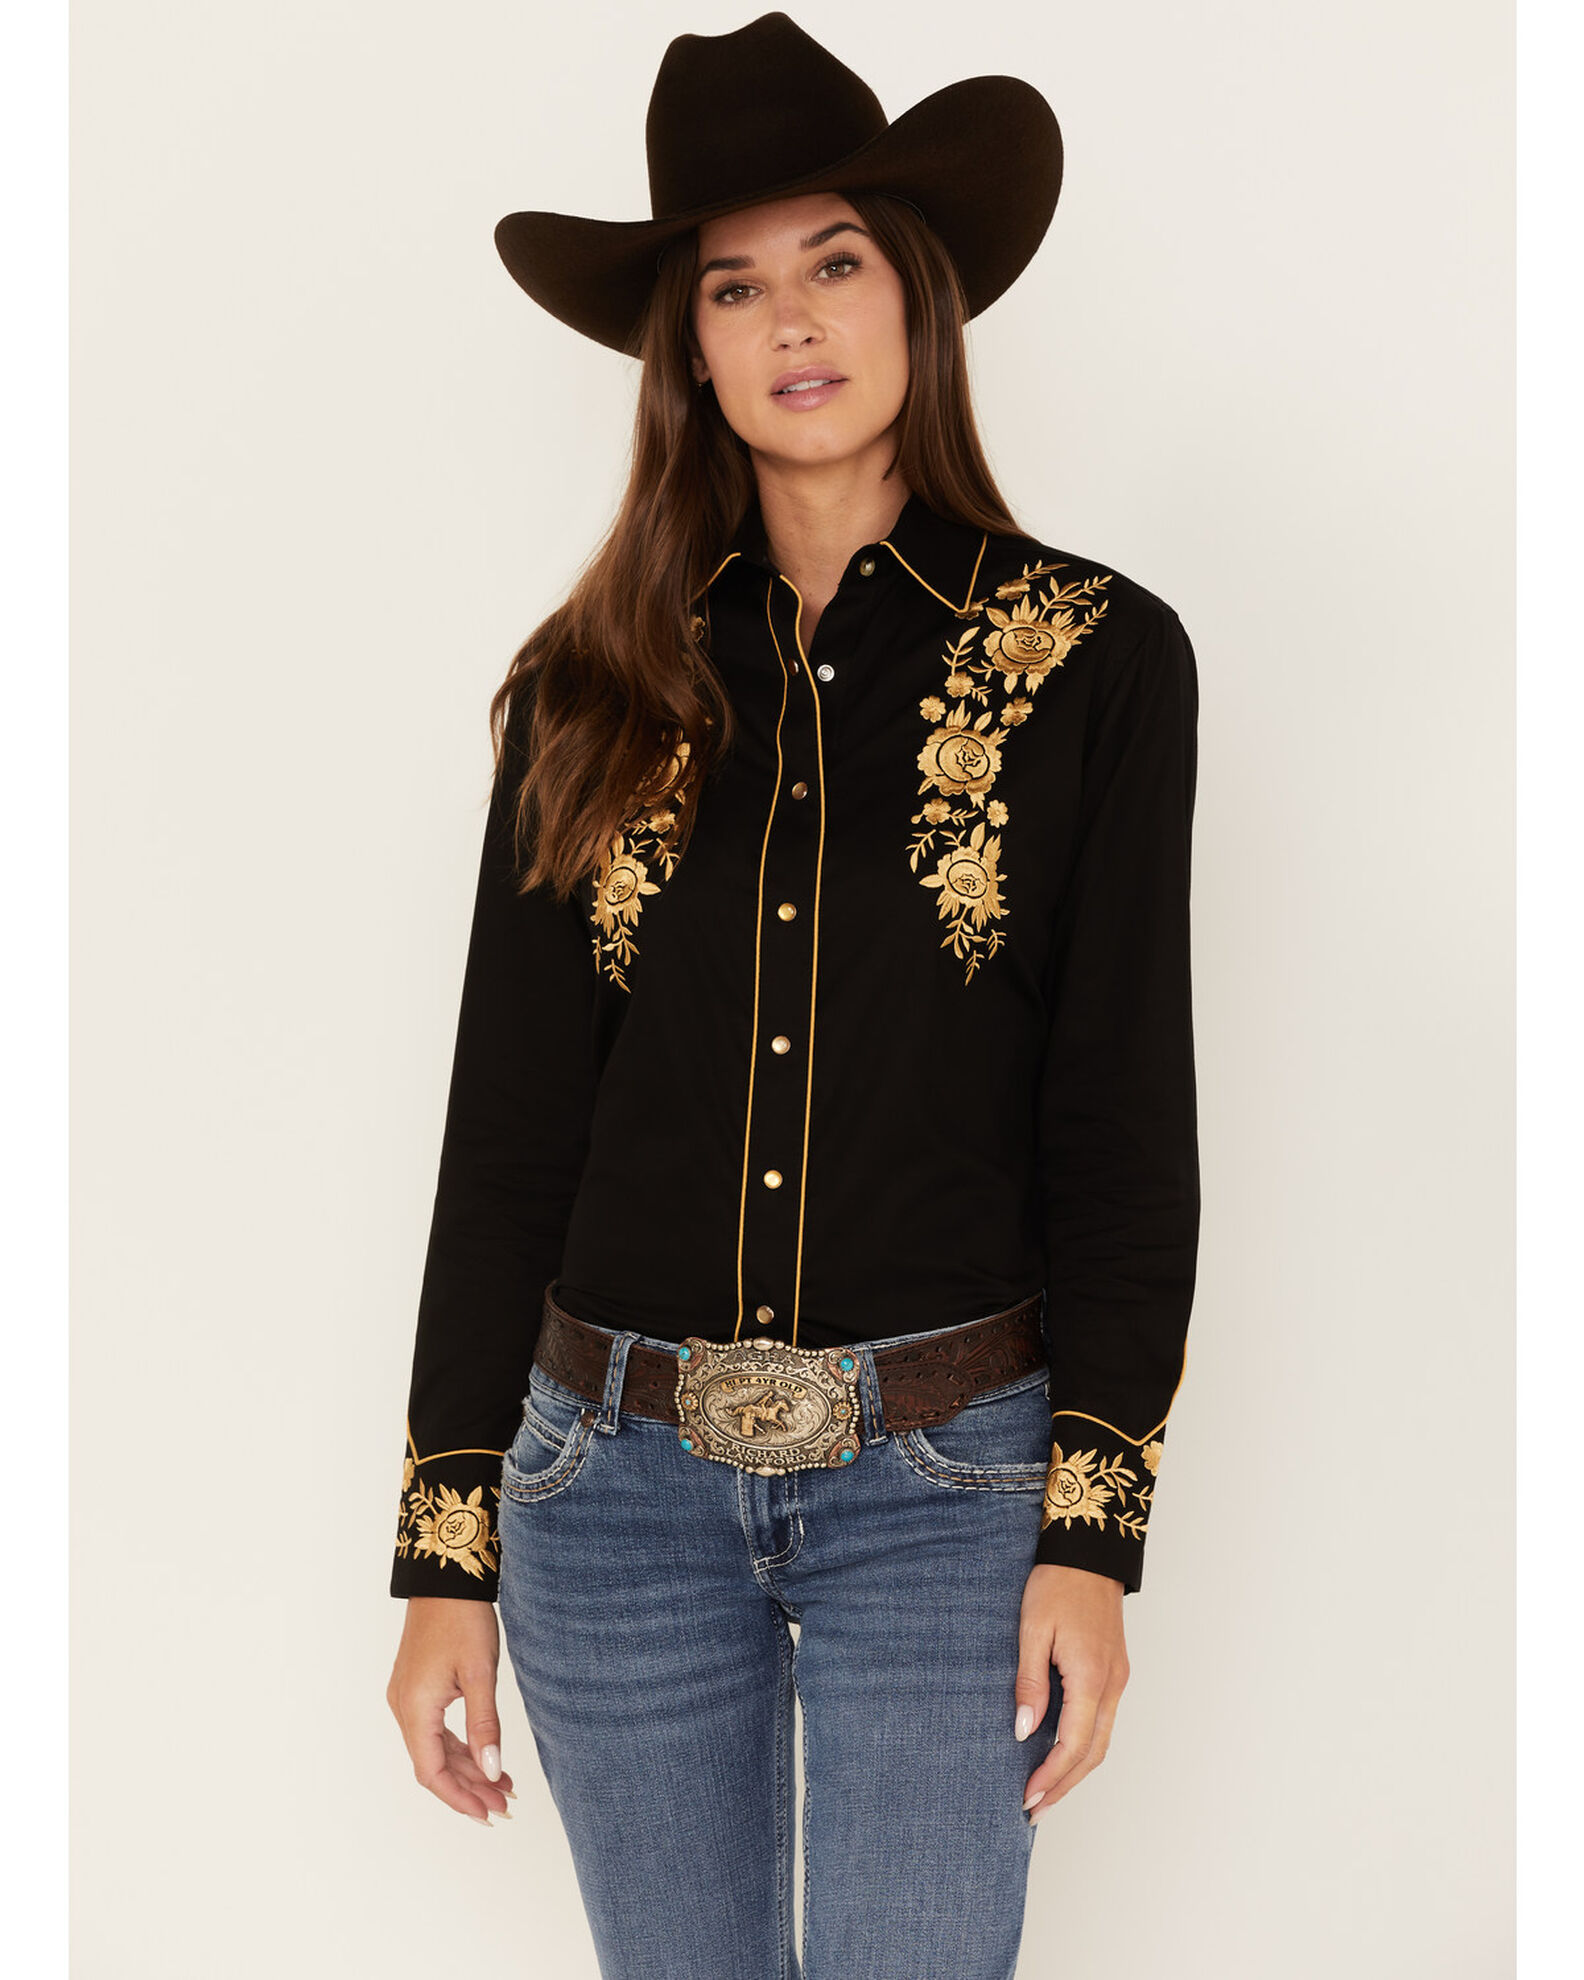 Rockmount Ranchwear Women's Cascading Embroidered Floral Print